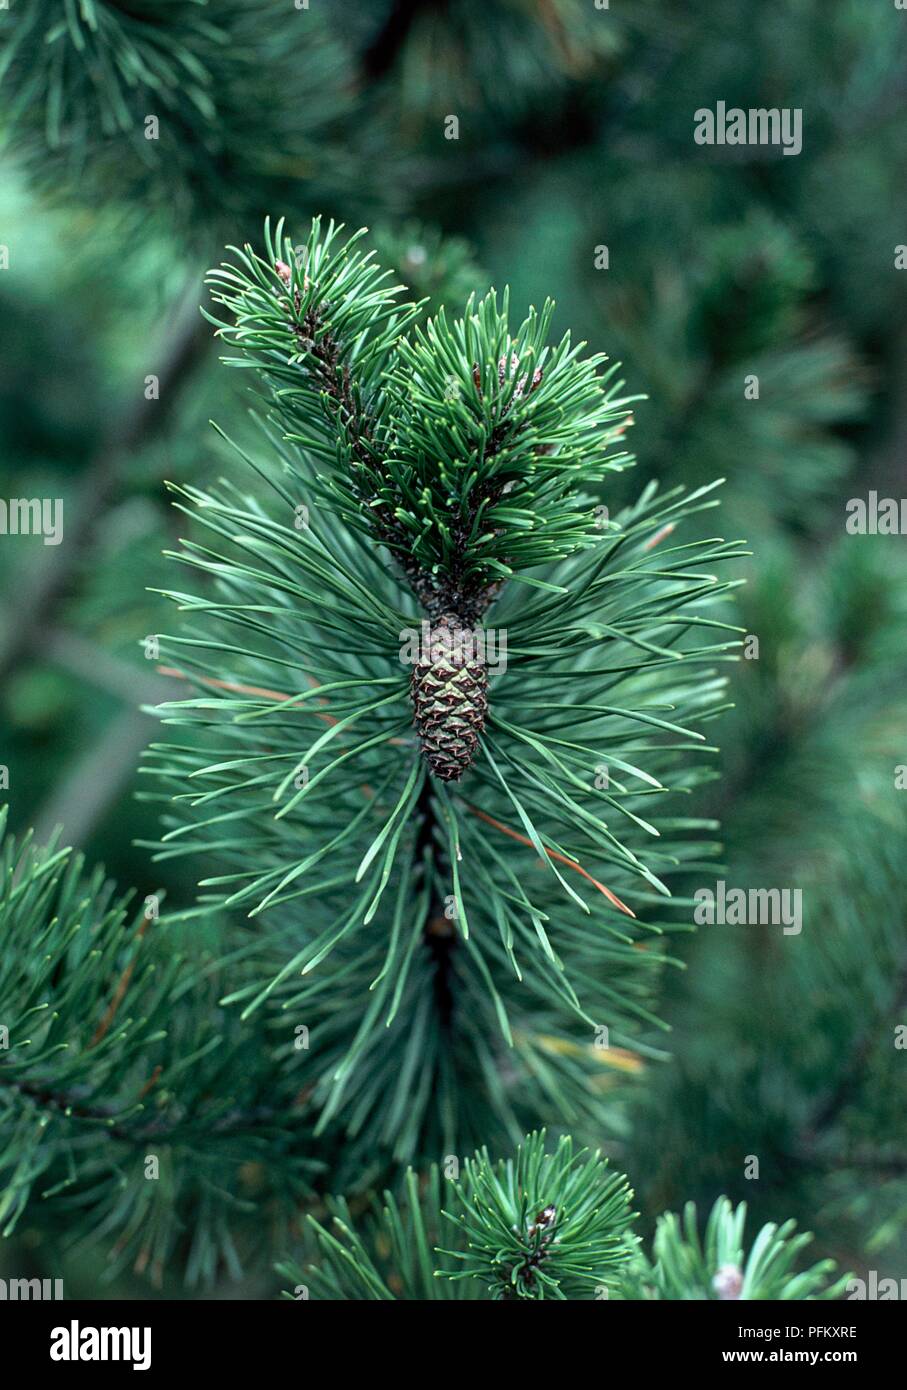 Pinus contorta var. latifolia (Lodgepole Pine) showing green foliage and small oval pinecones, close-up Stock Photo